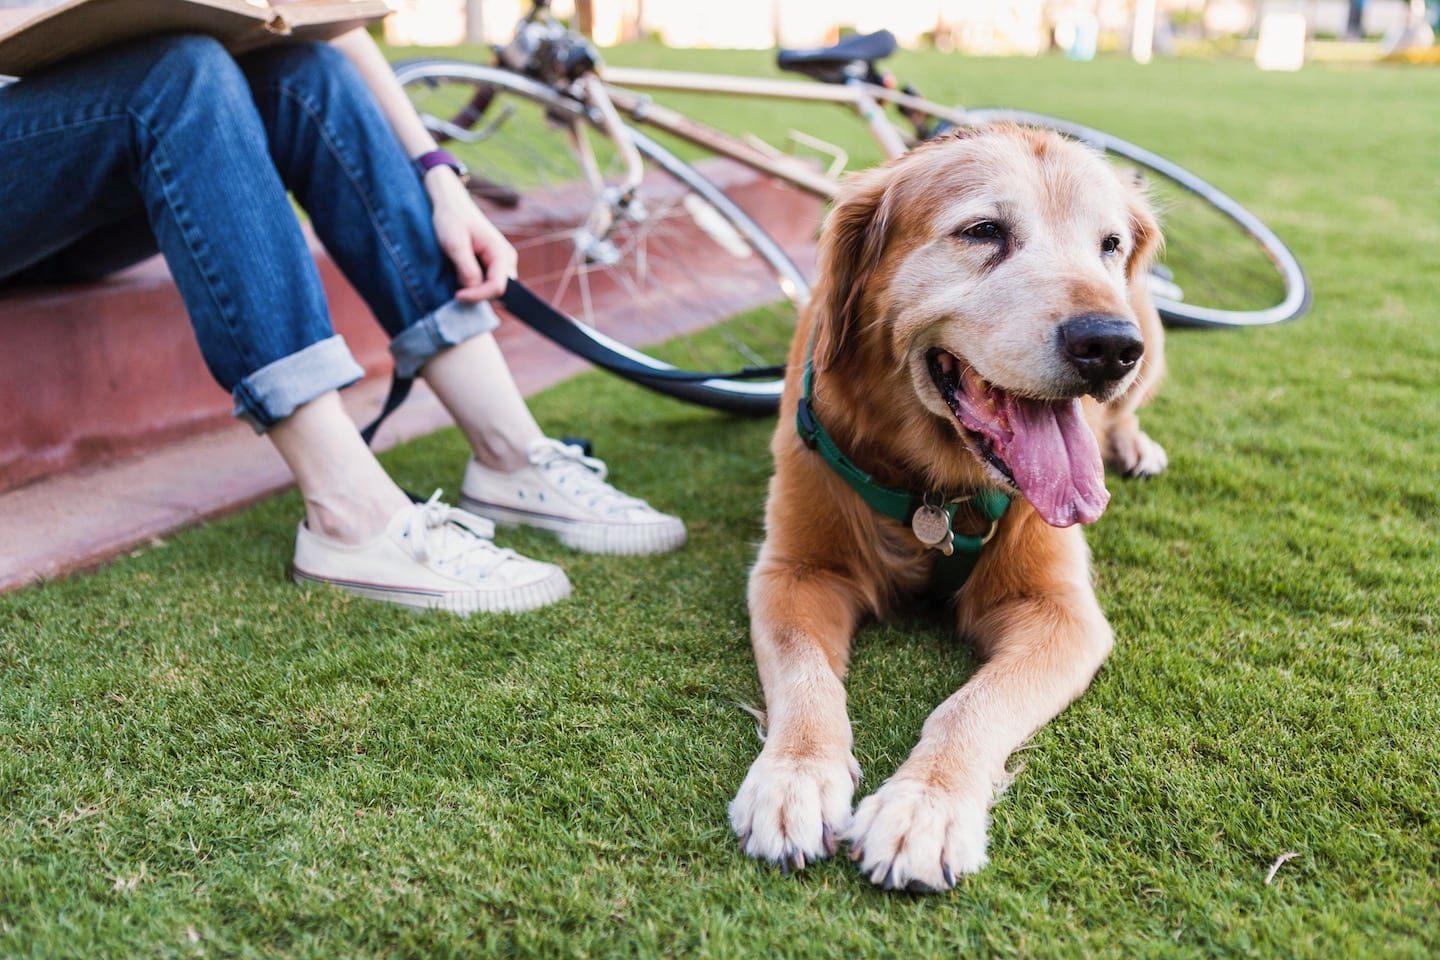 Dog hanging with owner and bicycle parked